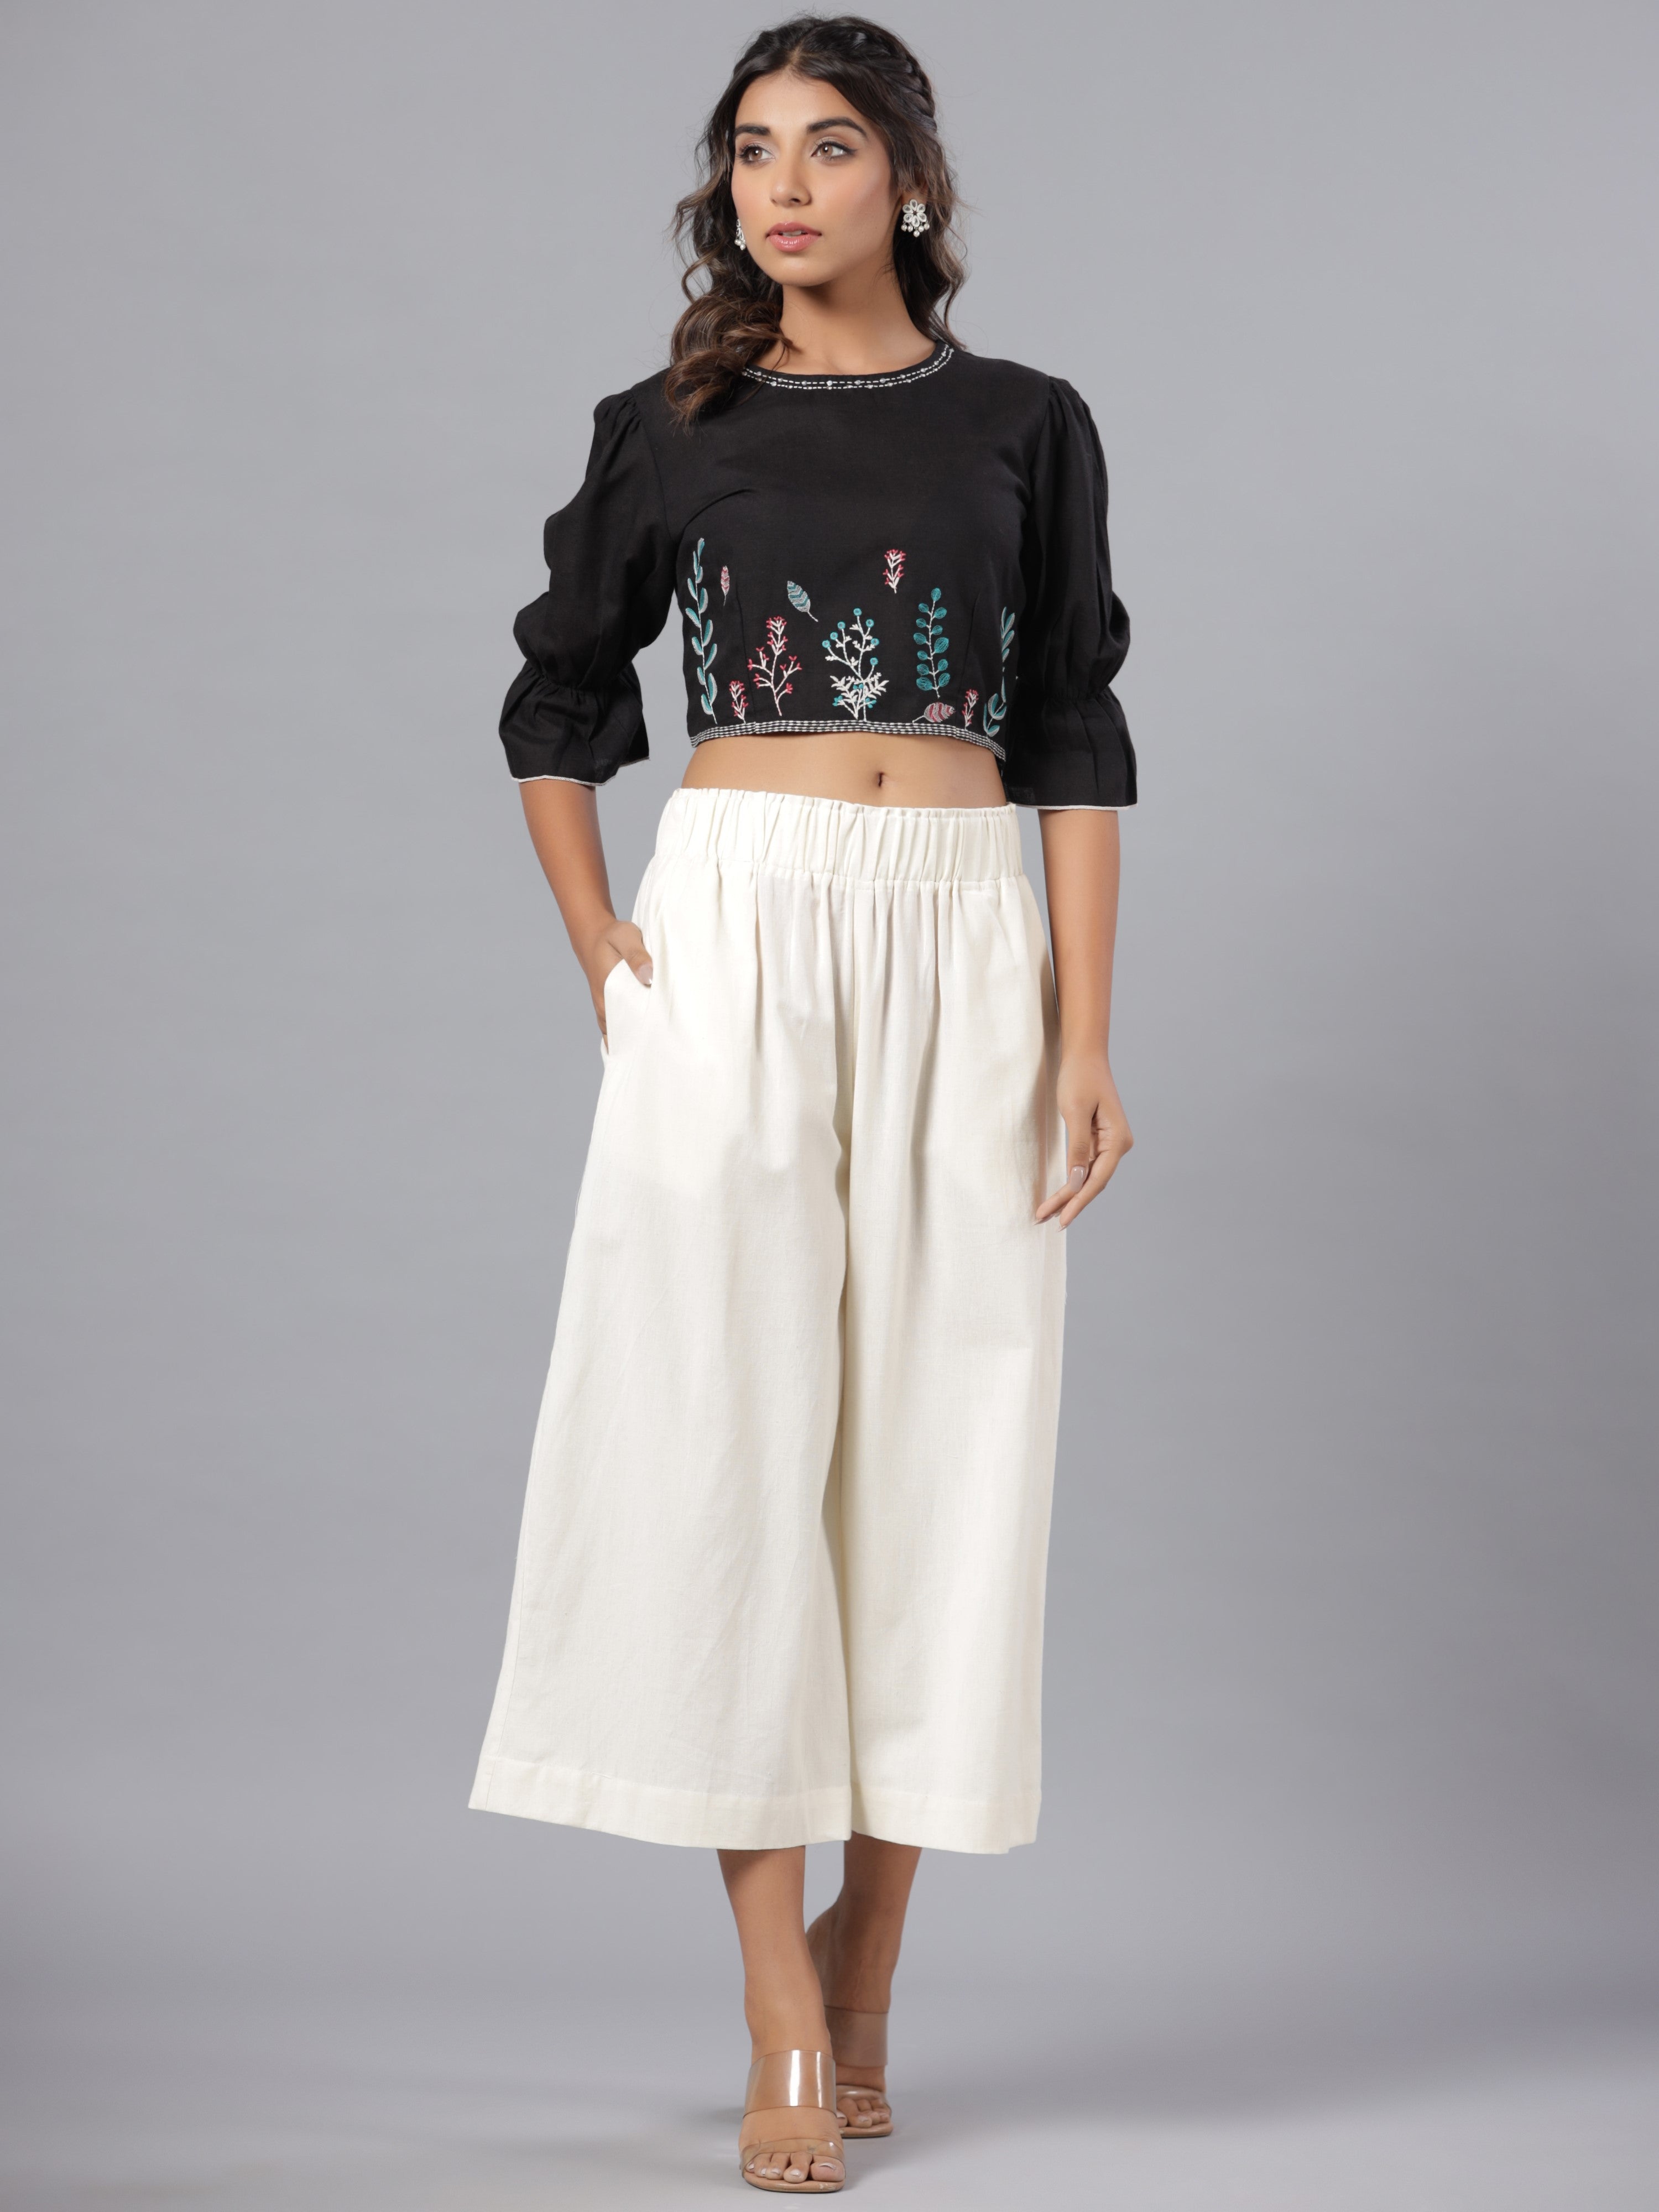 Juniper  Black Floral Printed Rayon Flex Crop Top With Thread Embroidery